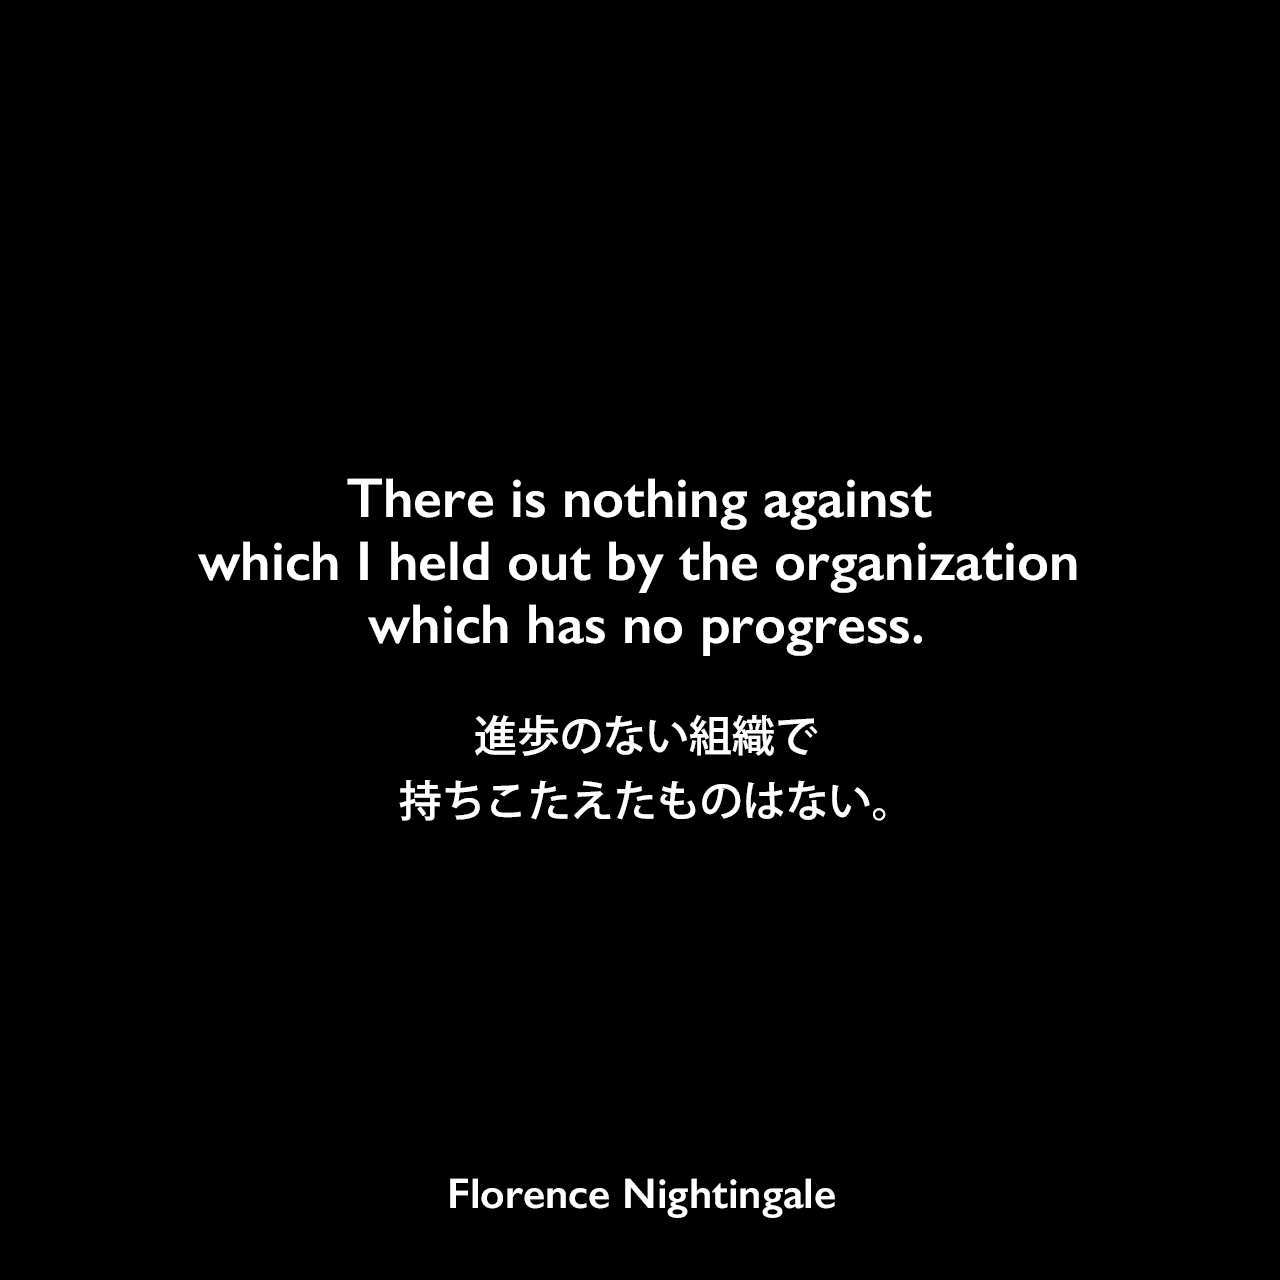 There is nothing against which I held out by the organization which has no progress.進歩のない組織で持ちこたえたものはない。Florence Nightingale